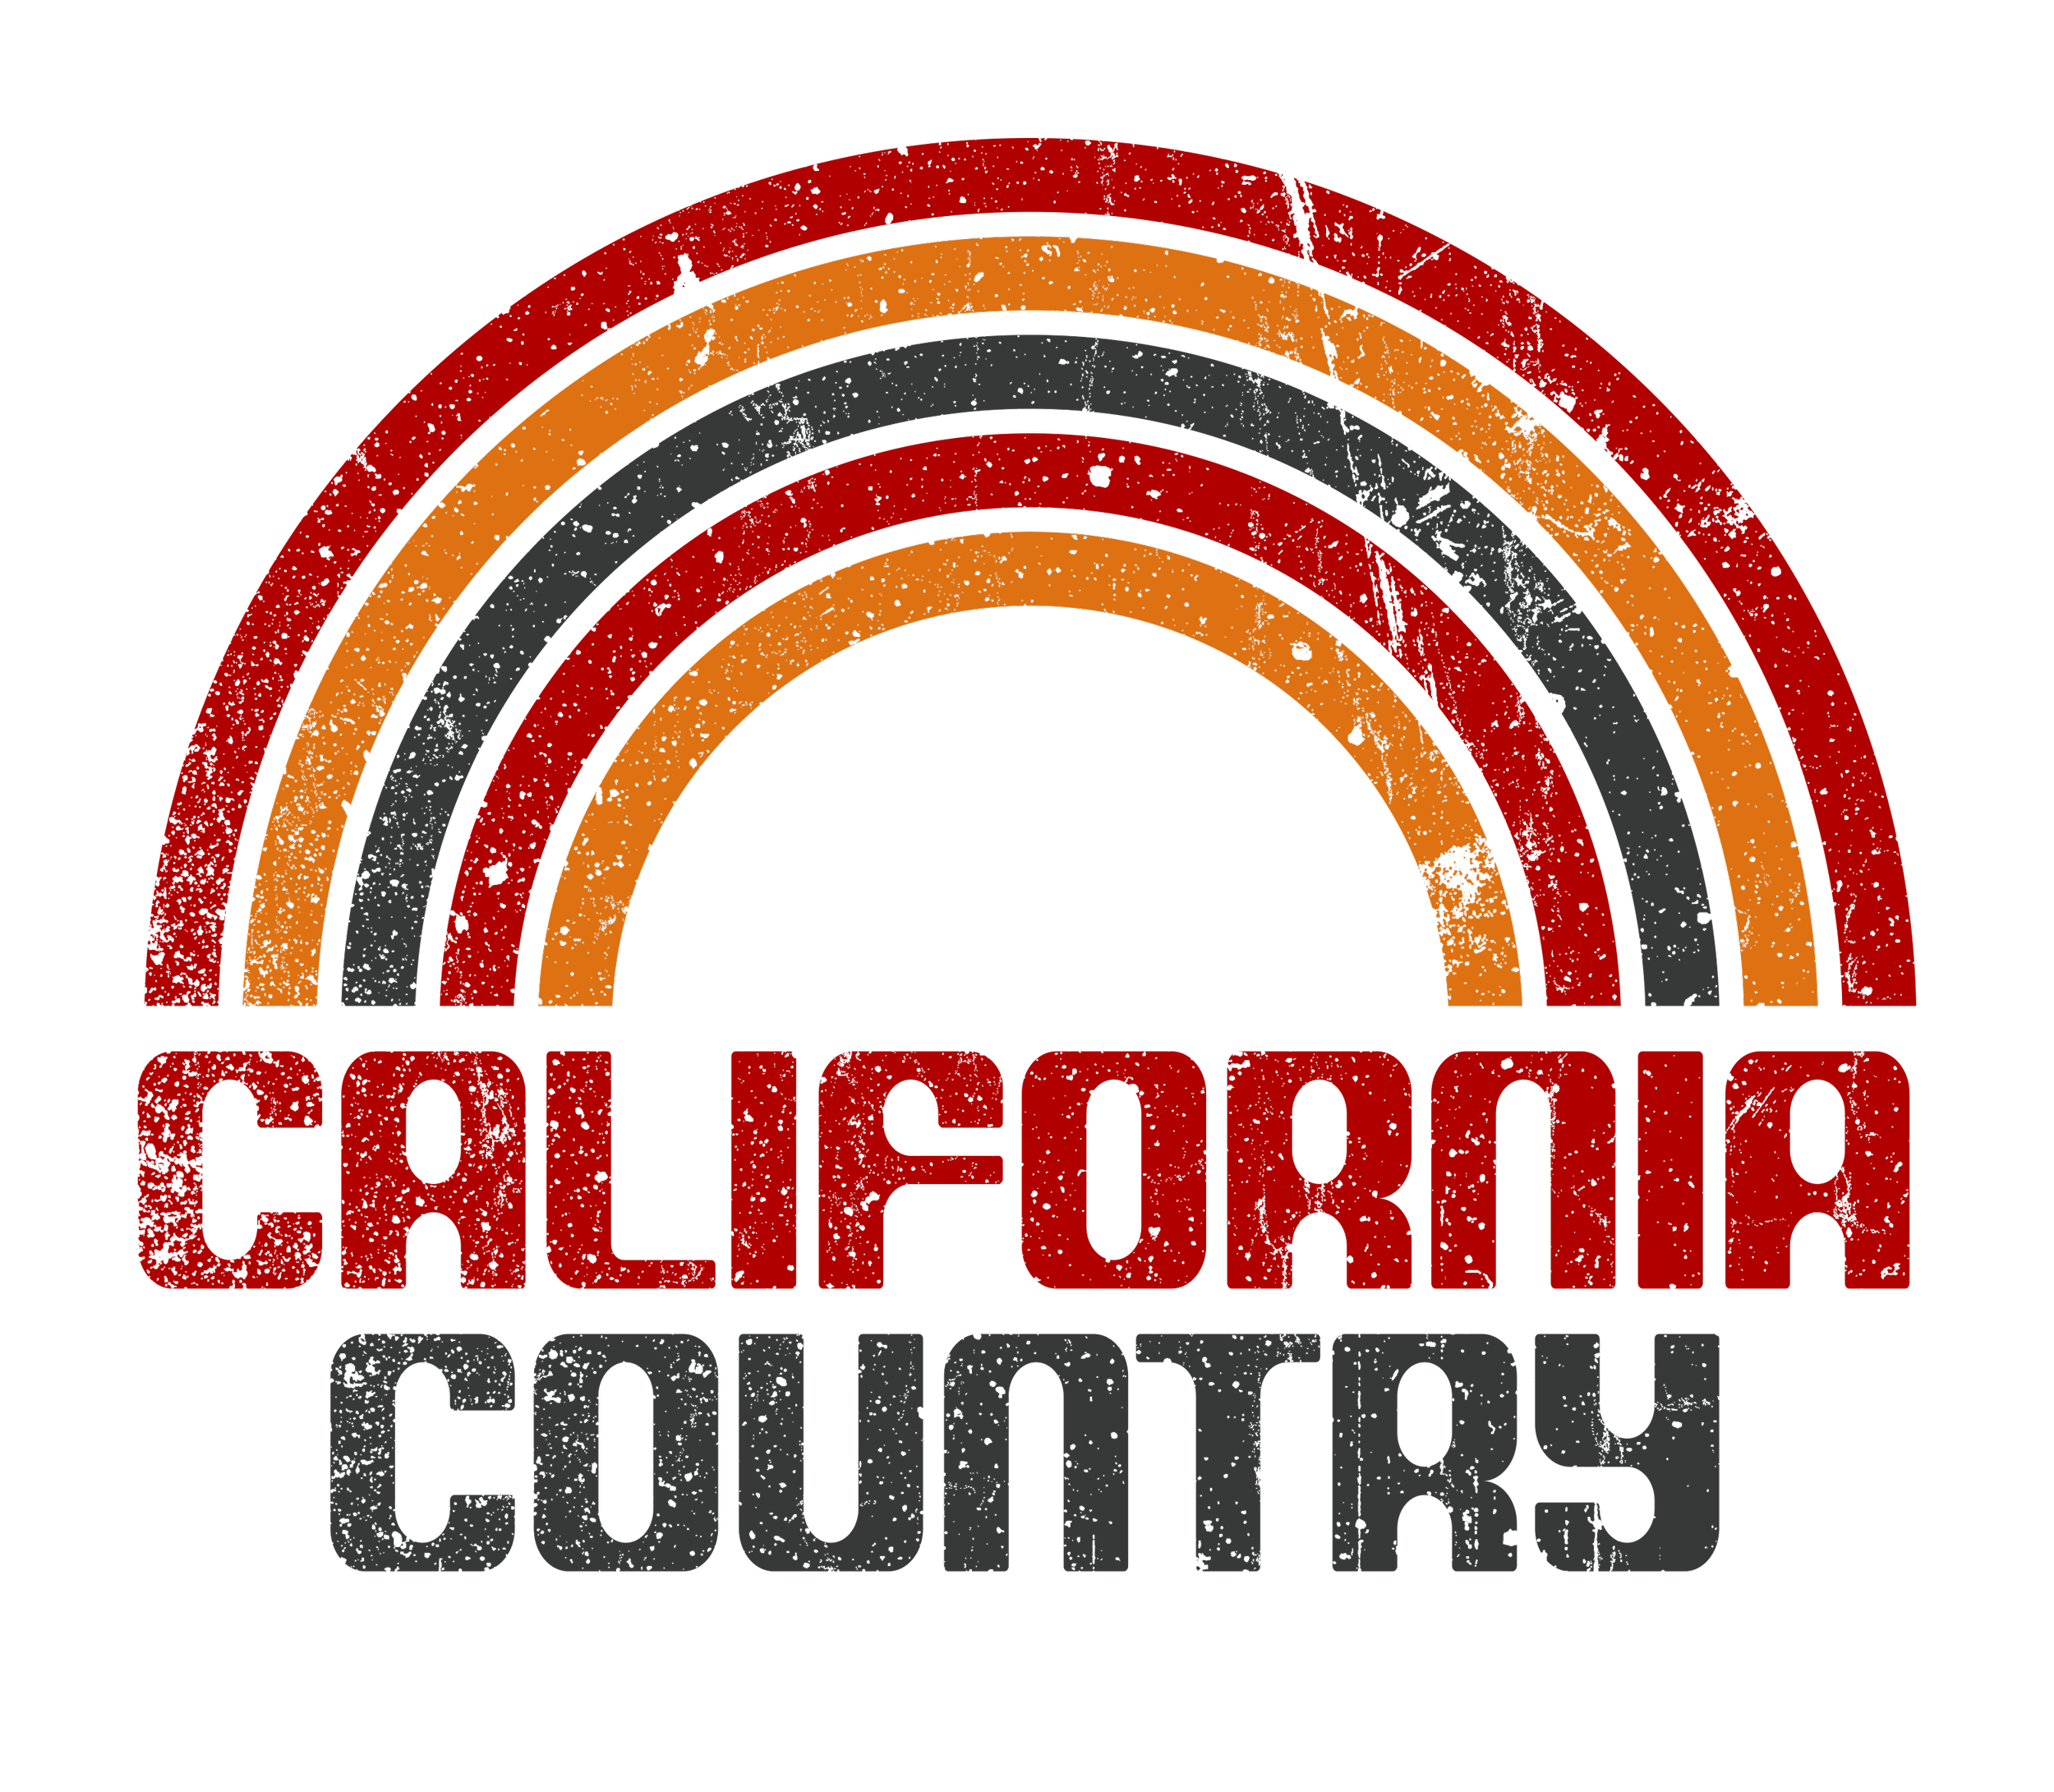 CaliforniaCountry-highres.png